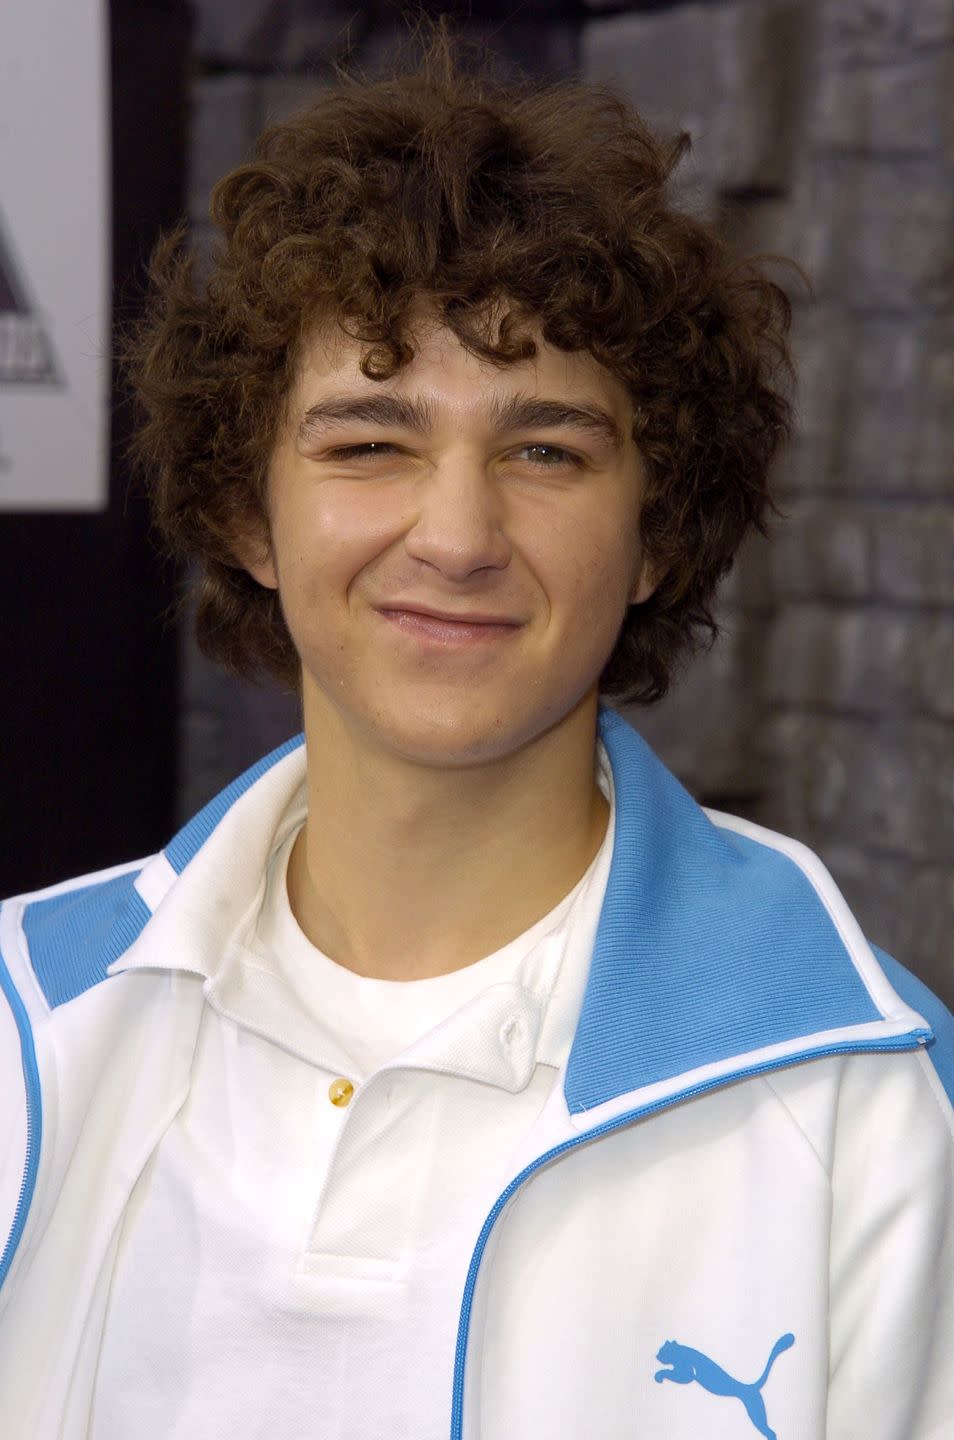 <p>The rise in popularity of the "mop head" look let teenage boys everywhere grow out their hair with minimum maintenance or styling required. And for that, we in part have Shia LaBeouf to thank.</p>